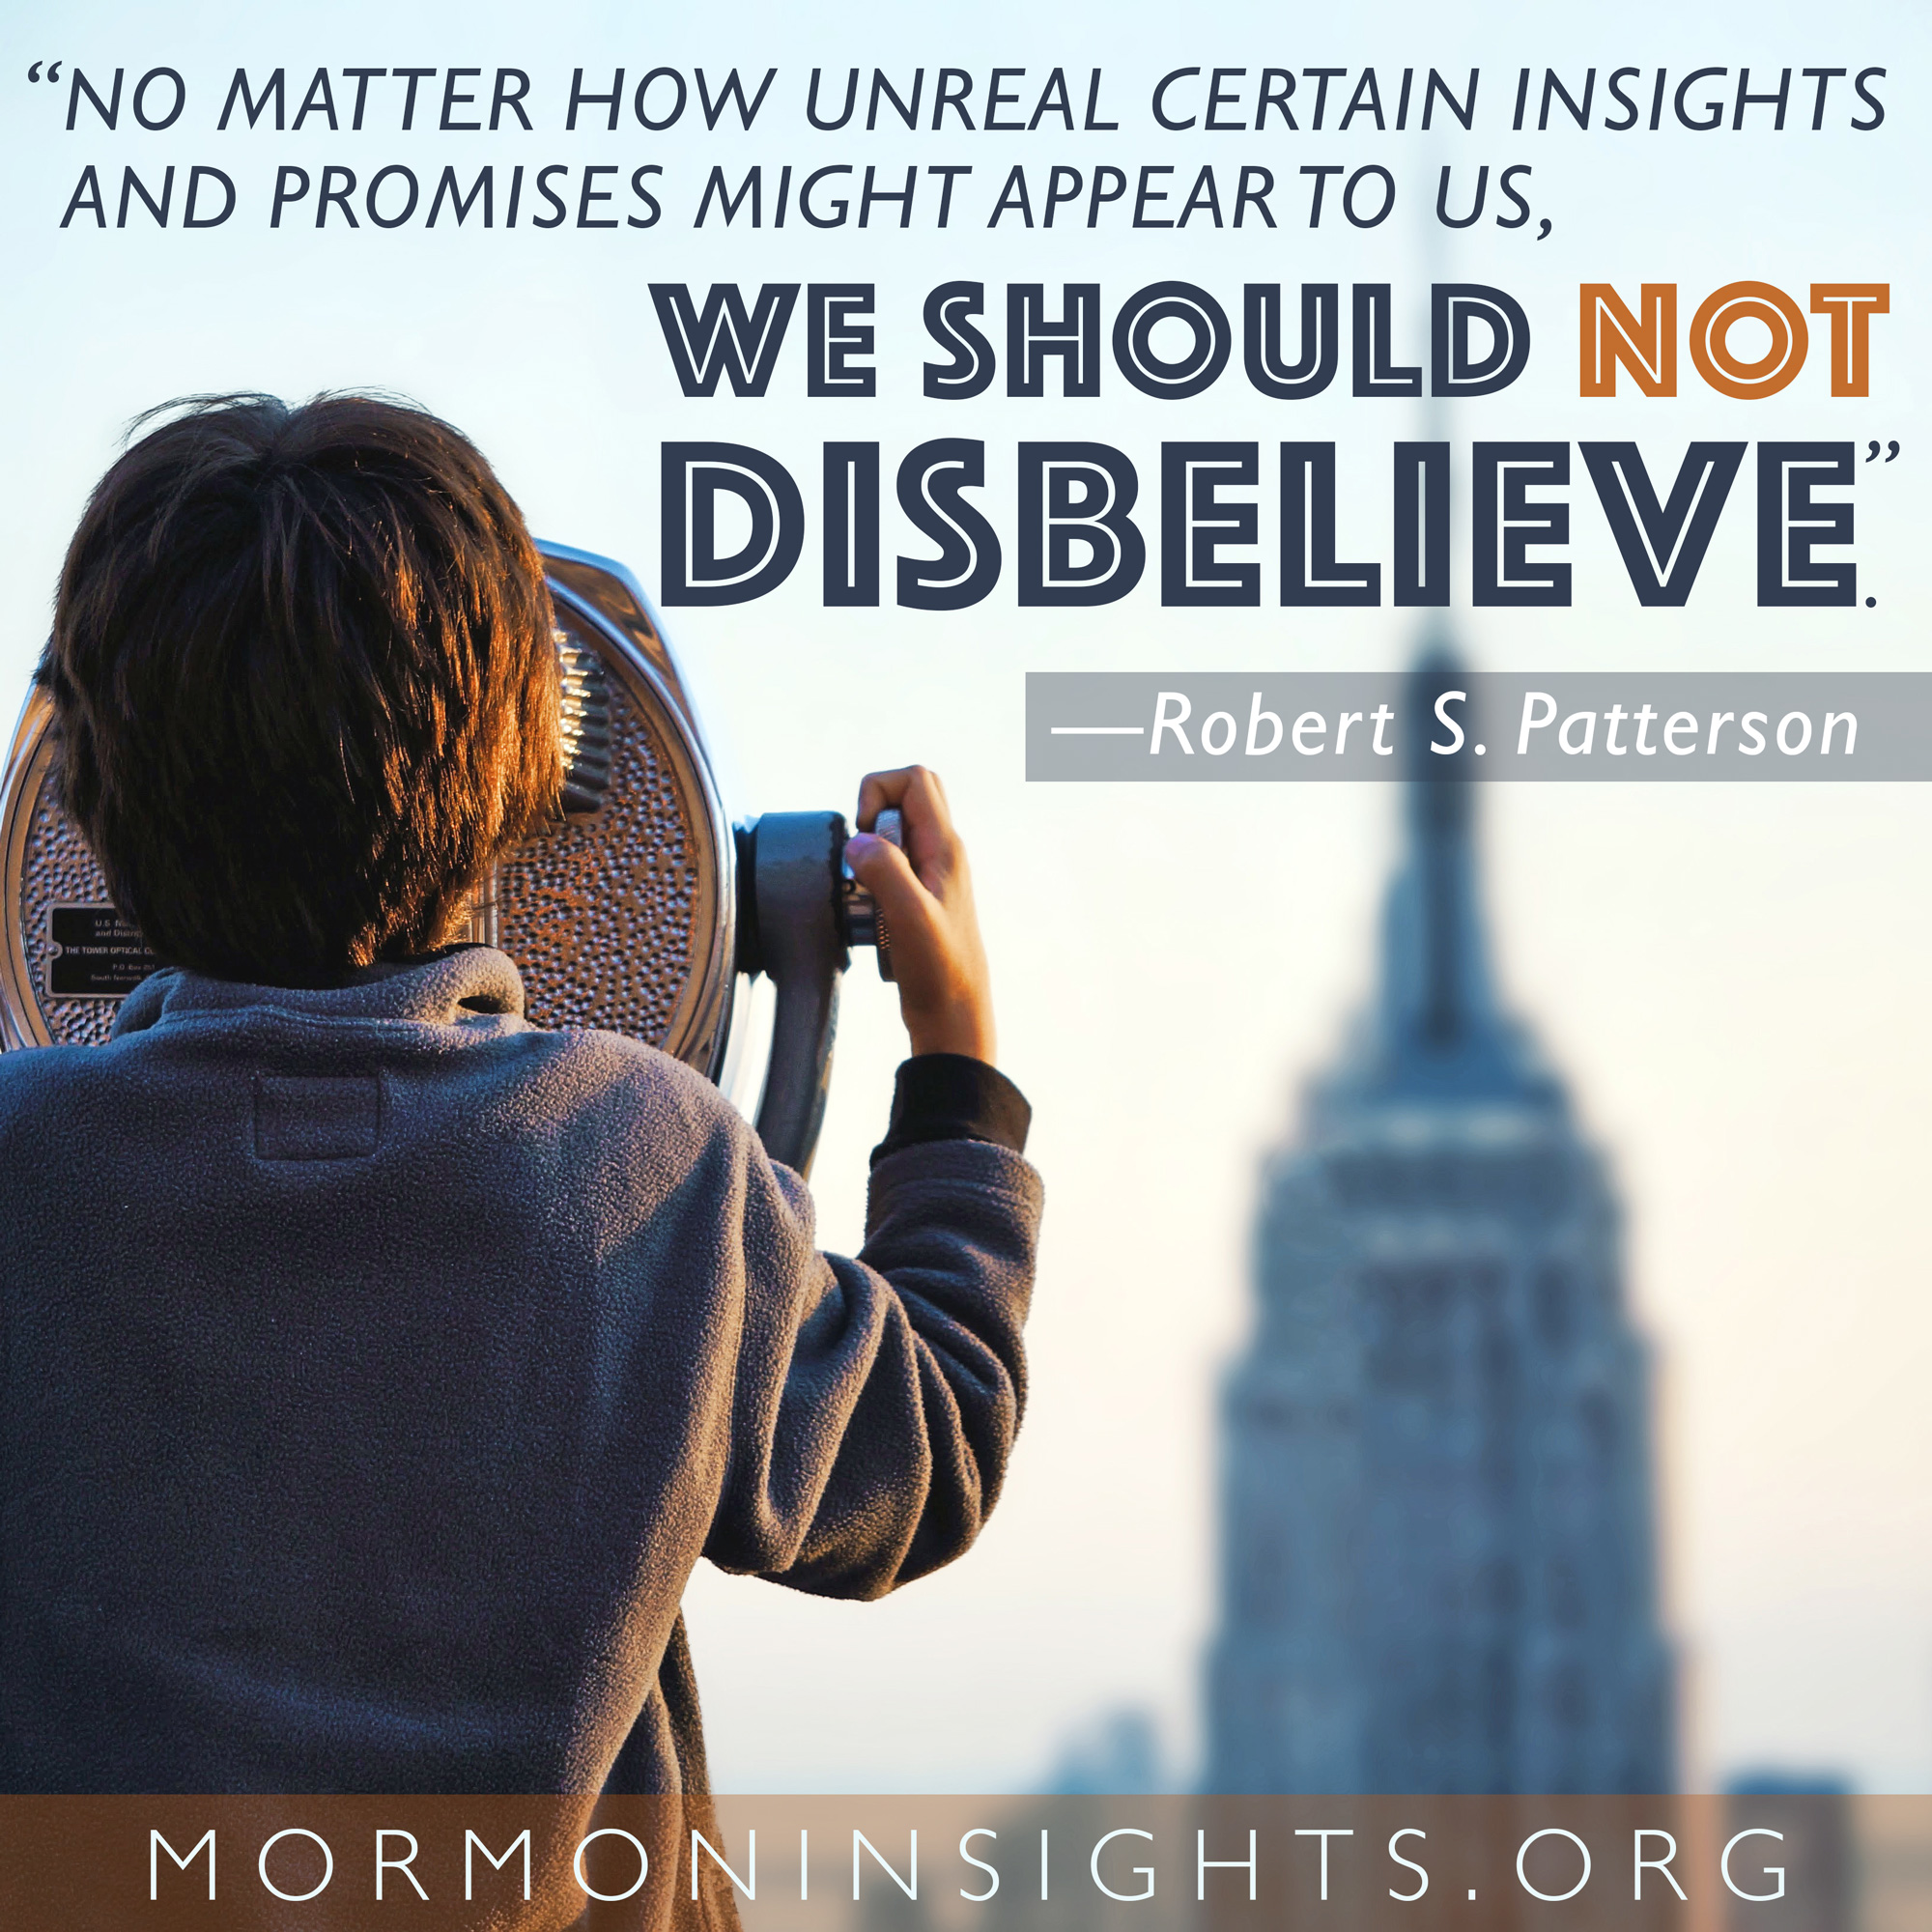 "No matter how unreal certain insights and promises might appear to us, we should not disbelieve." -Robert S. Patterson